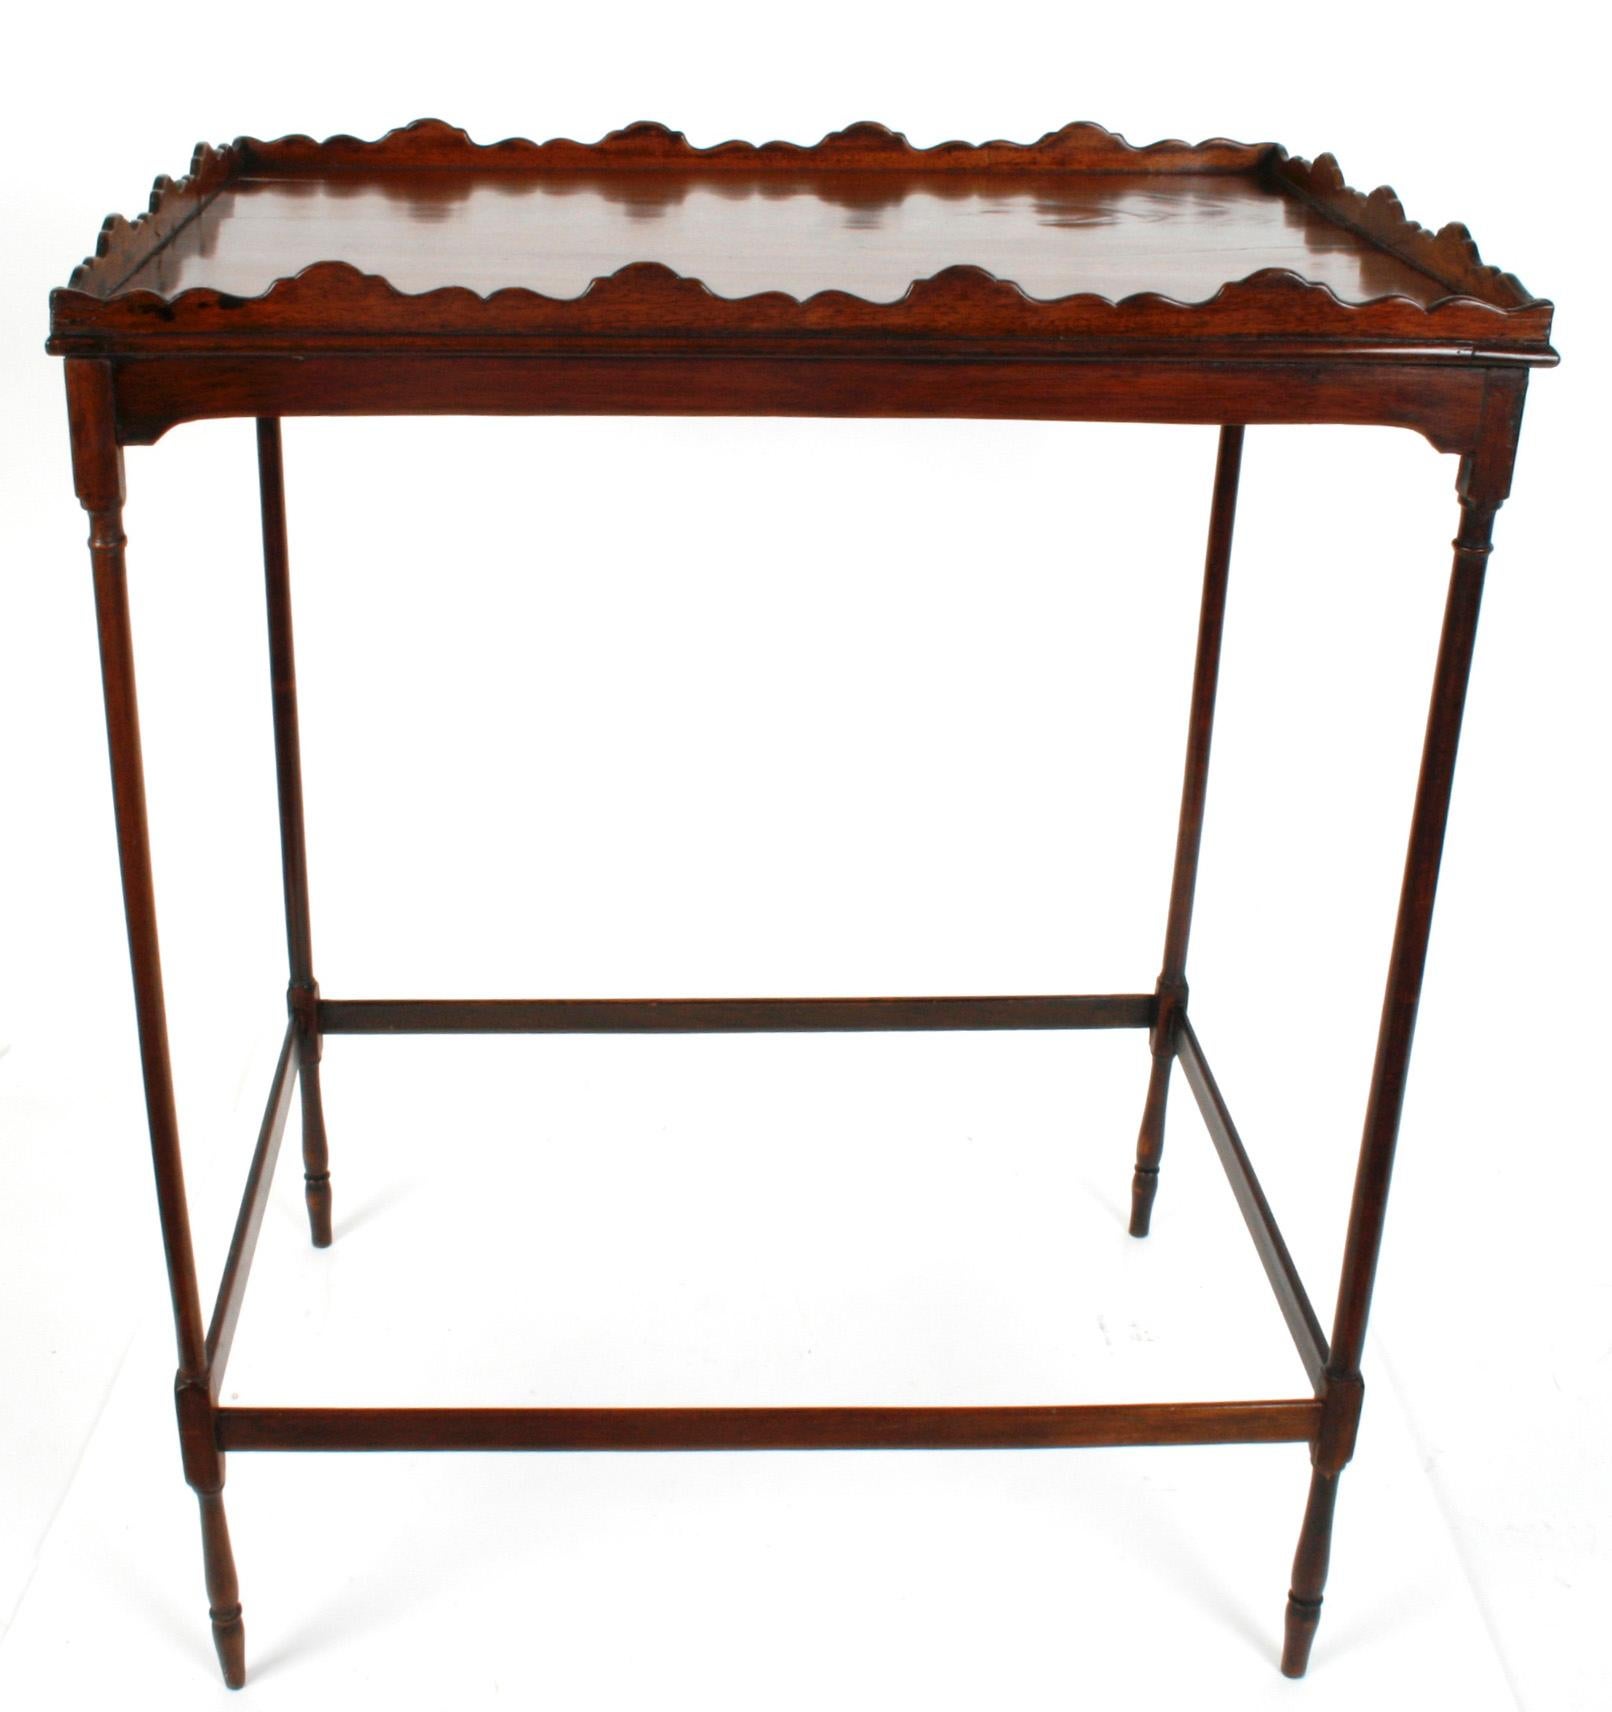 A George III Mahogany silver/tea table, c1780. The table base has four finely turned (spider) legs with cross stretchers and blocks at the joints. The table has an oblong, single board, mahogany top with a fancy scalloped gallery. Although the table